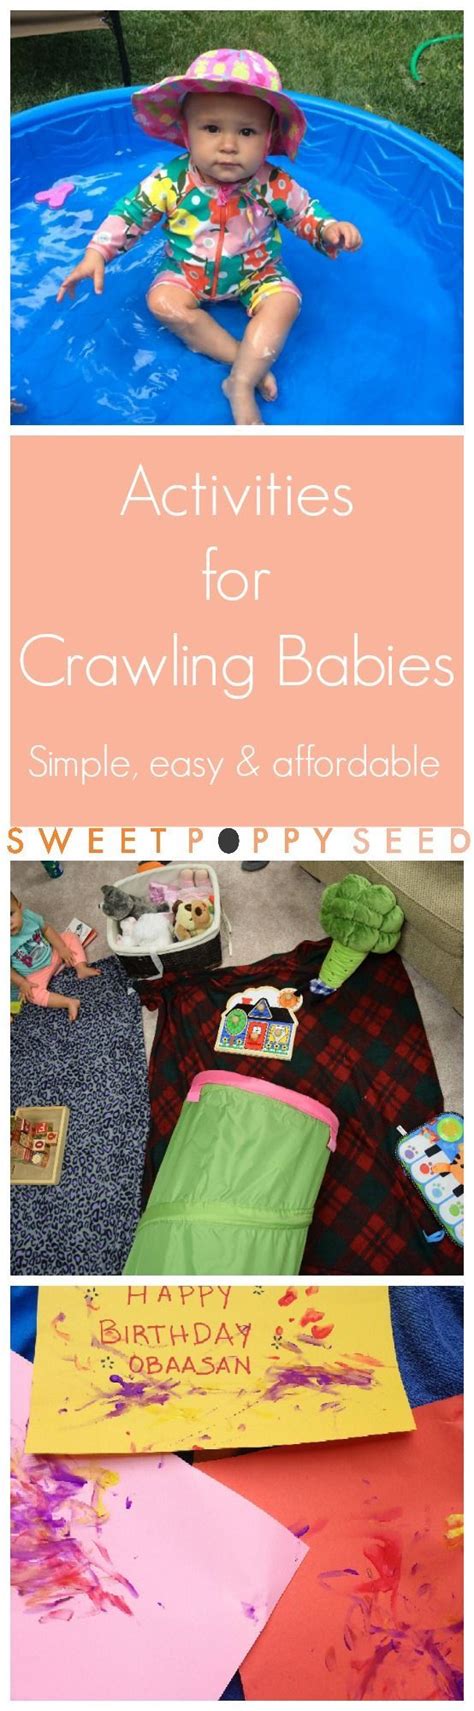 13 Activities For Crawling Babies Sweet Poppy Seed Potty Training